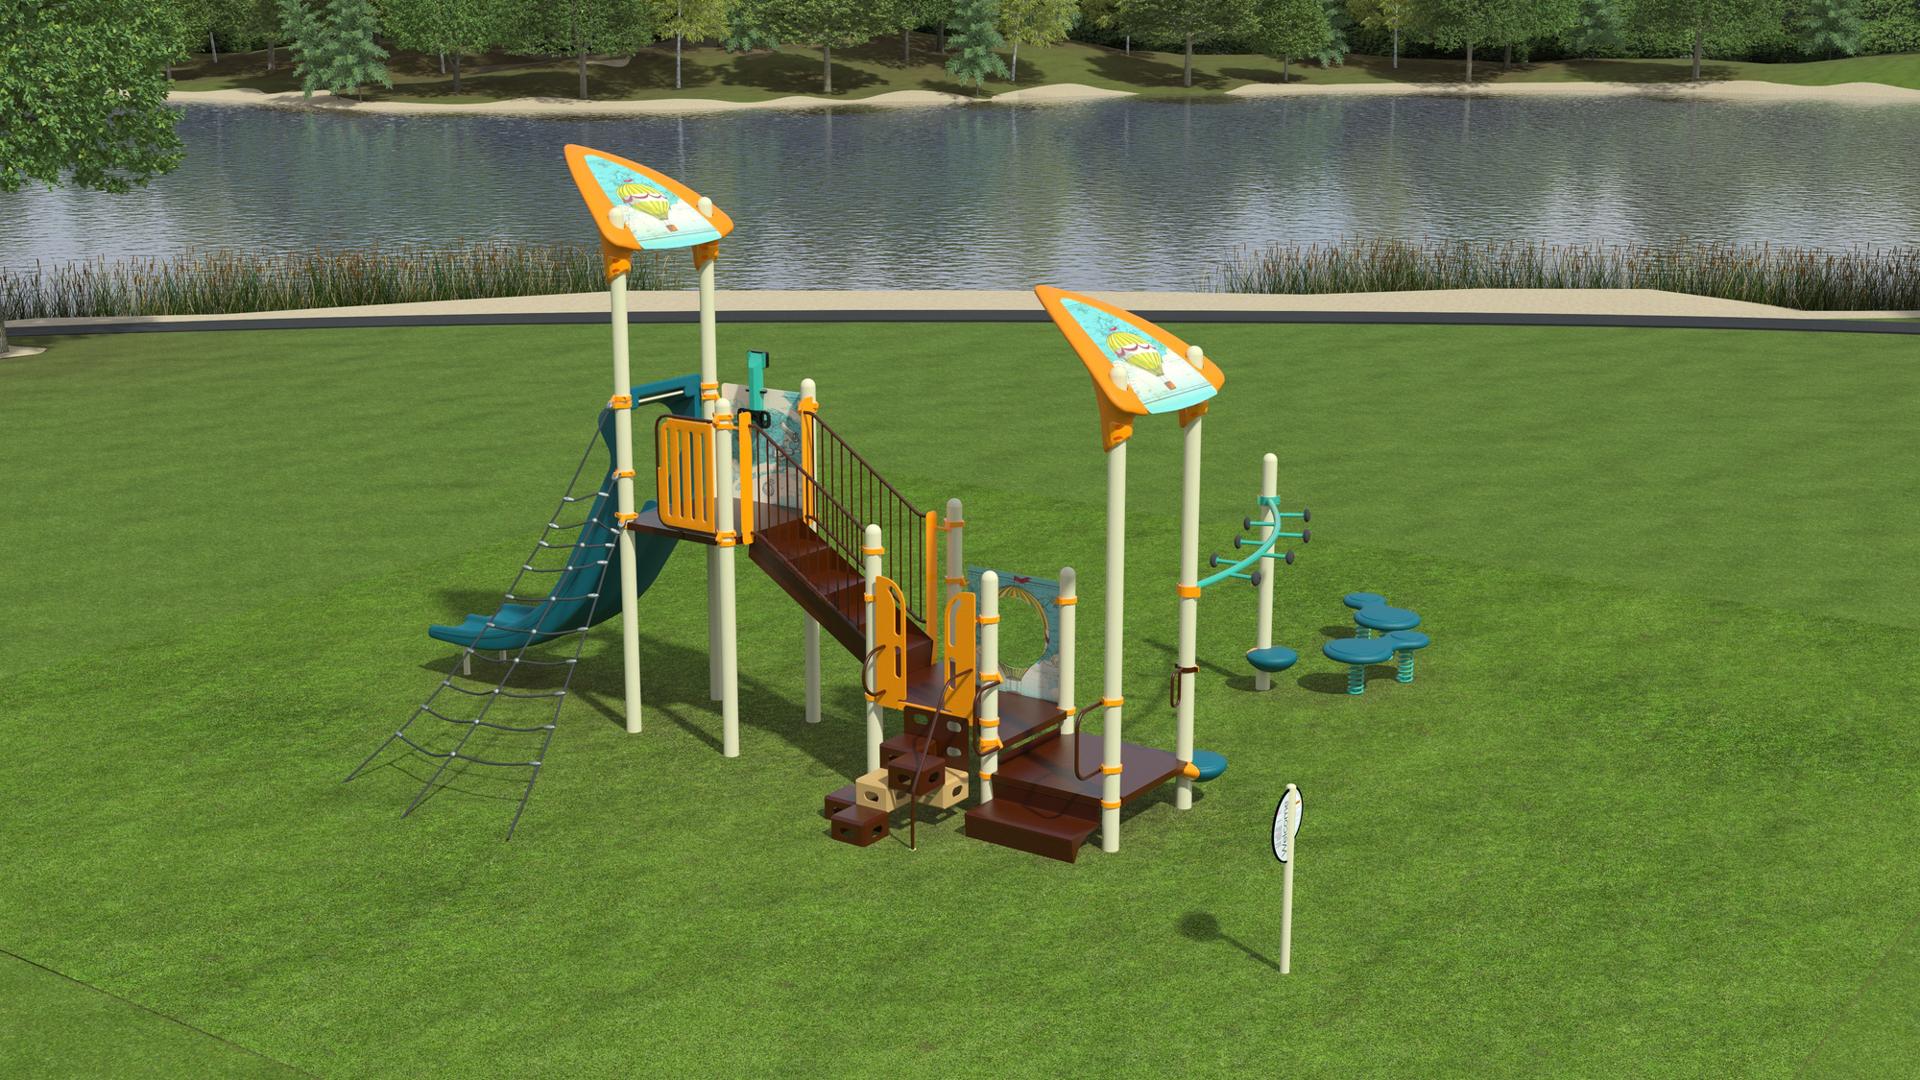 3D high realism image of a playground with a lake in the background. Playground is compact with a slide, climber and hot air balloon themed roofs and play panels. 